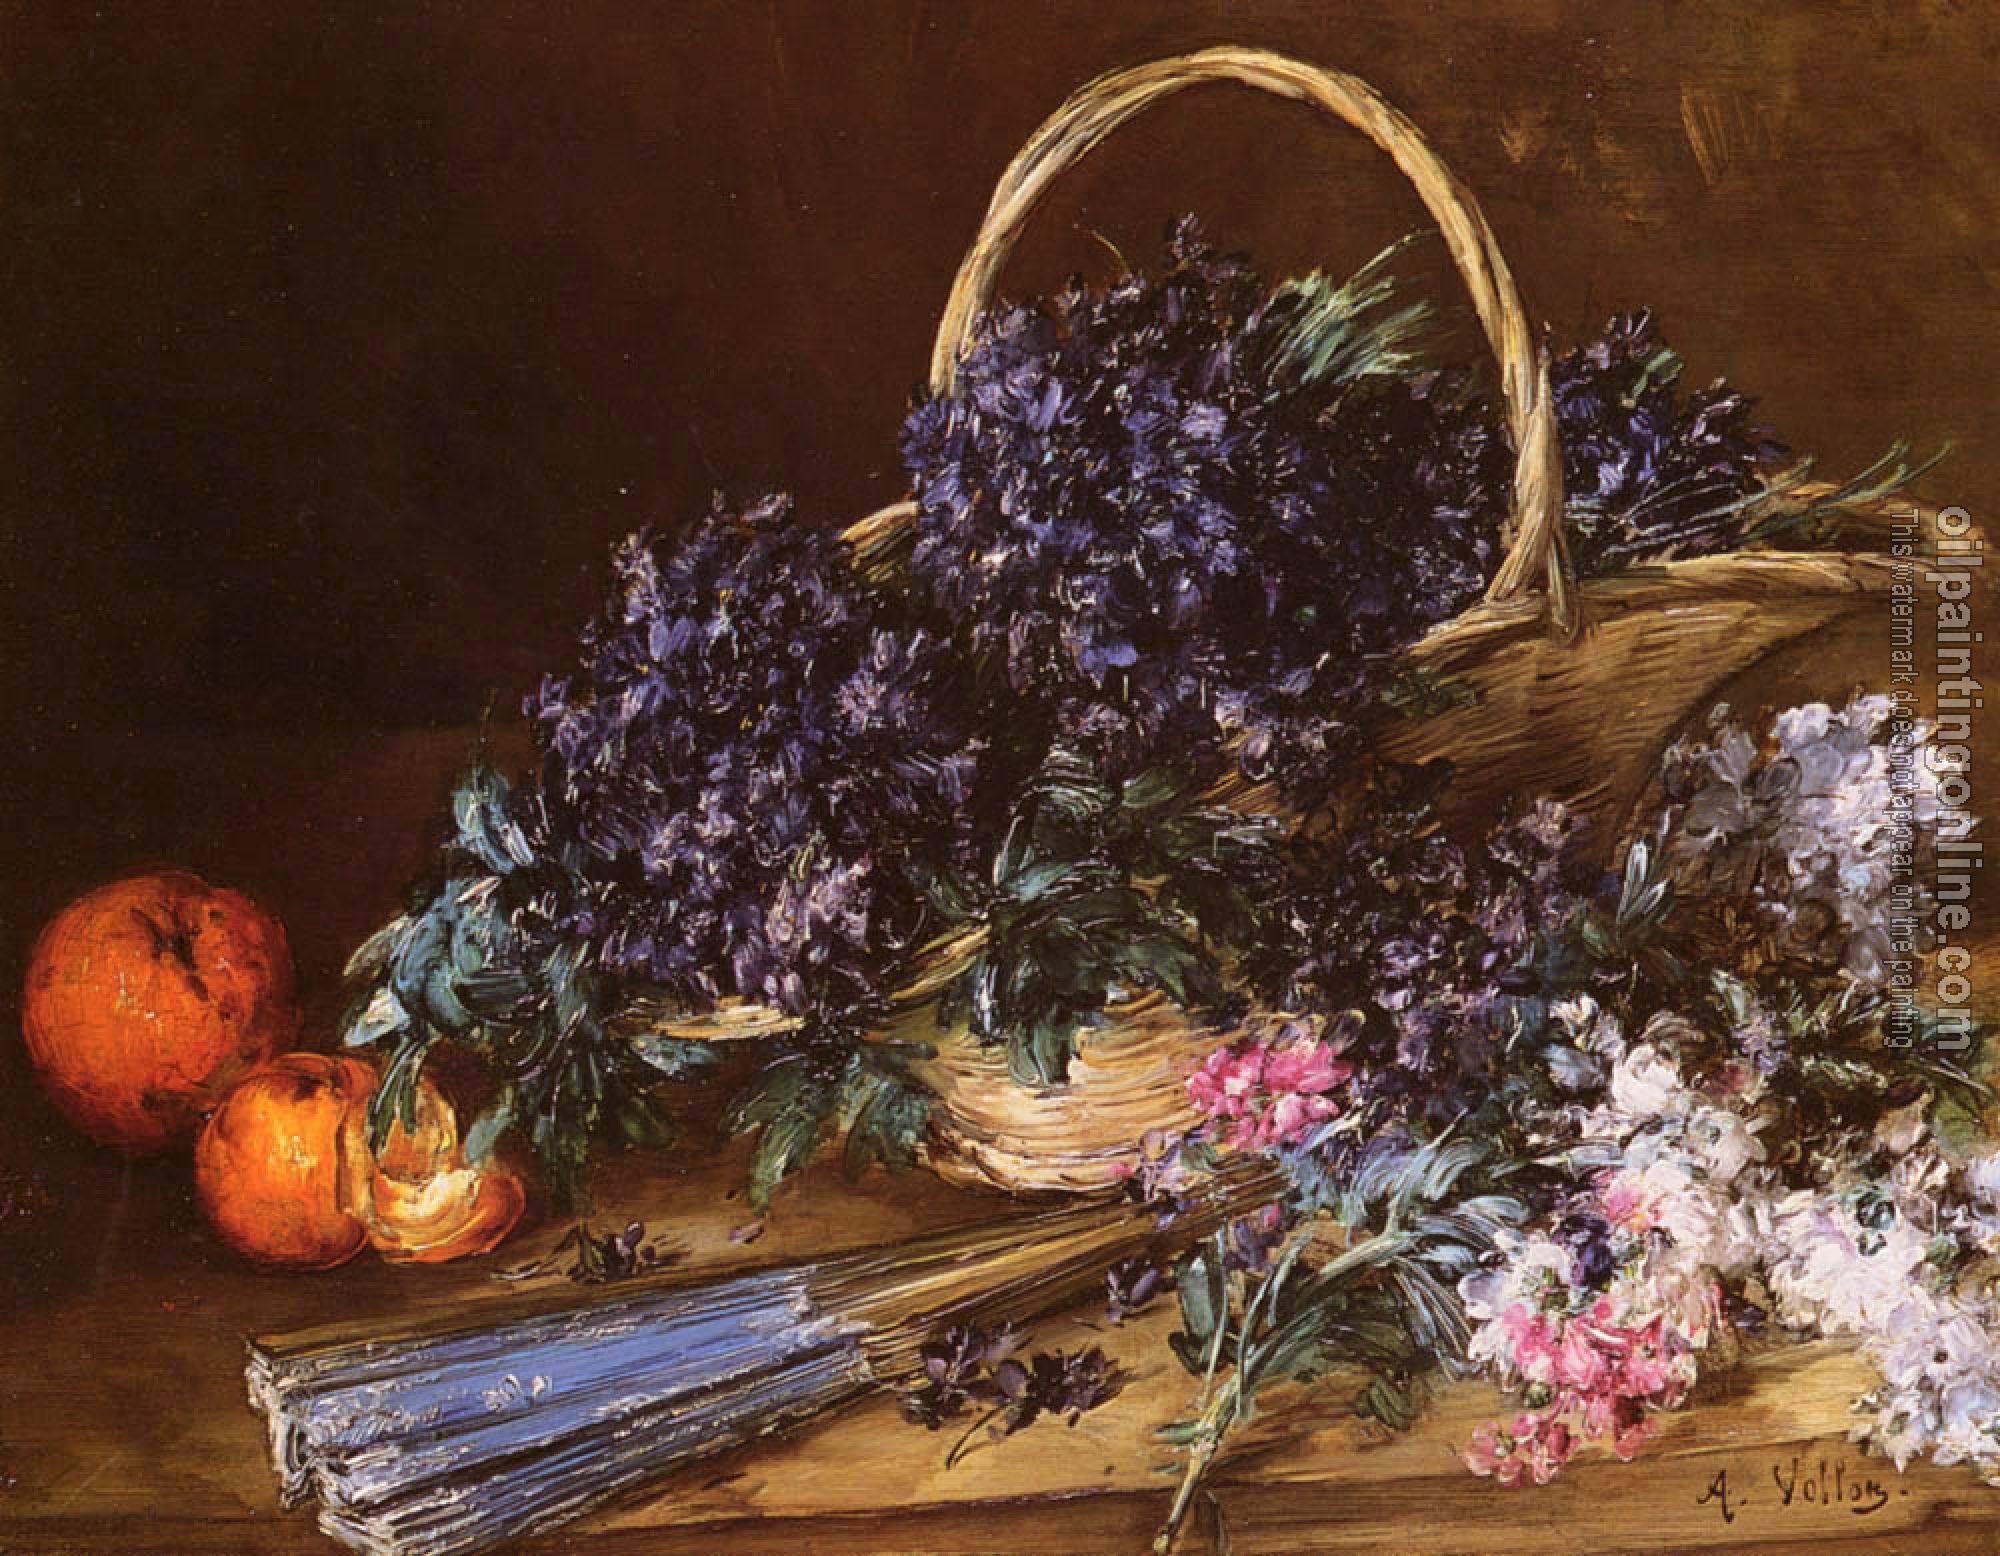 Vollon, Antoine - A Still Life with a Basket of Flowers